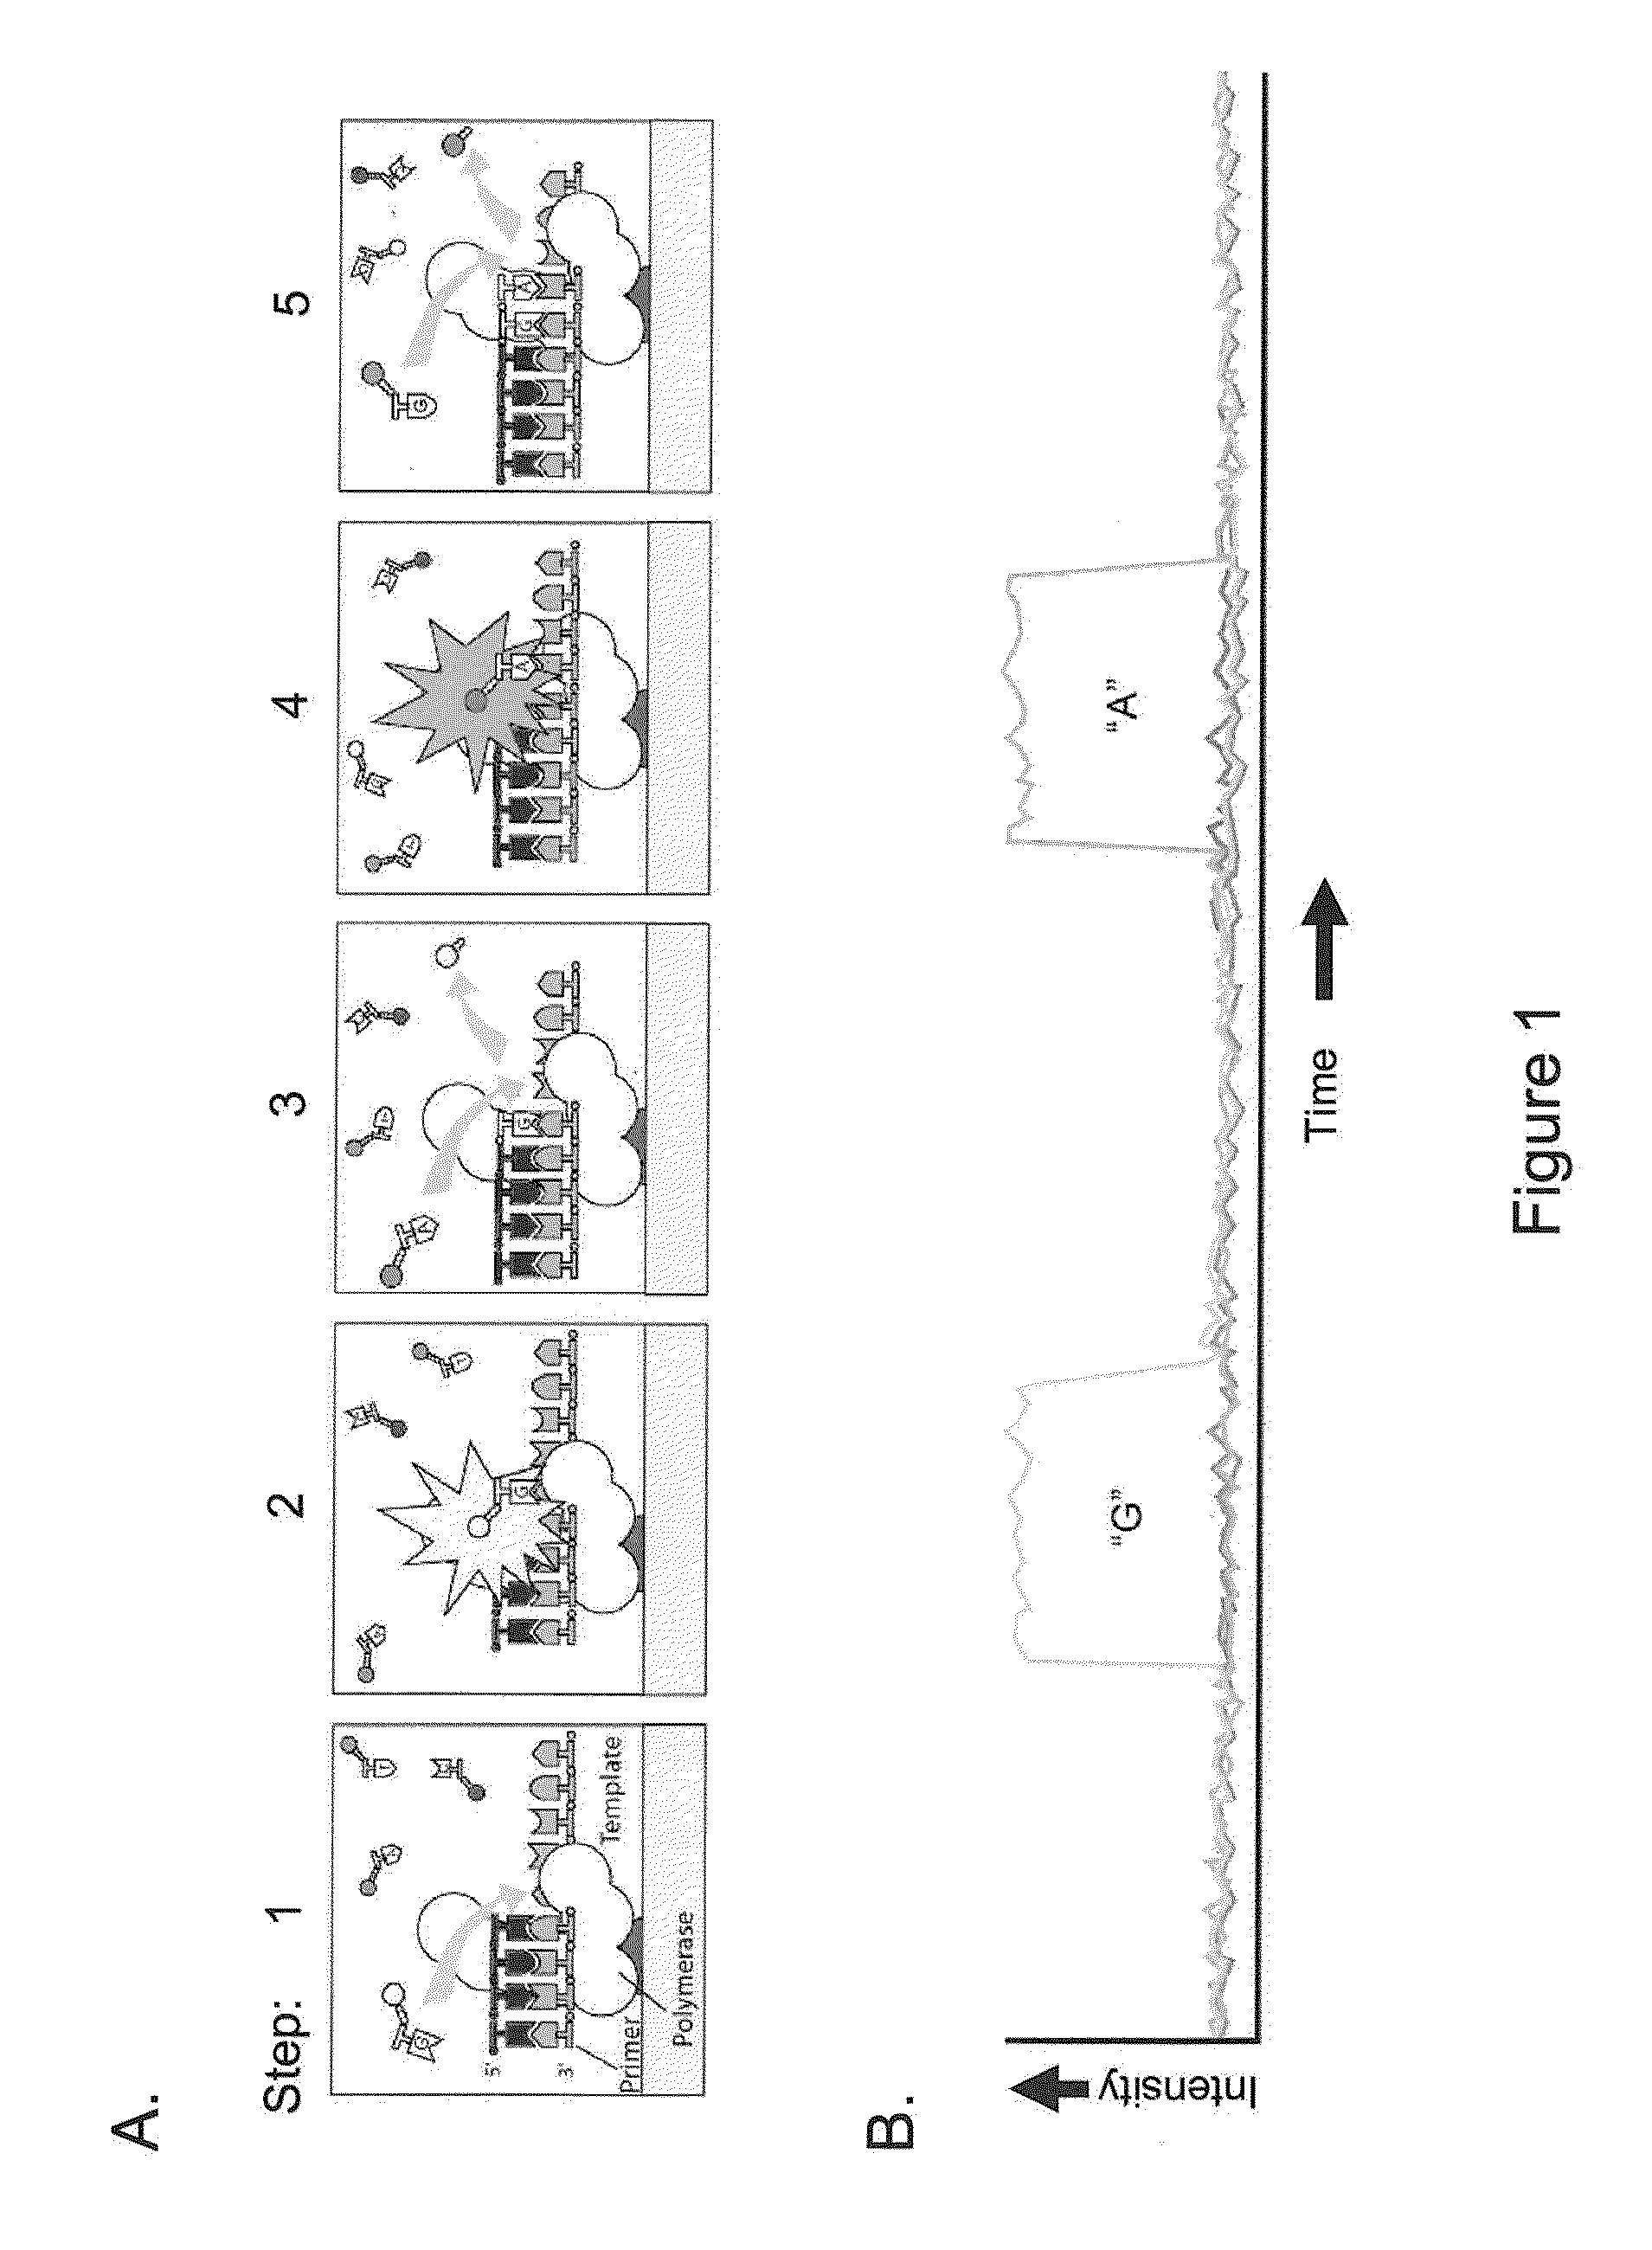 Methods for identifying nucleic acid modifications